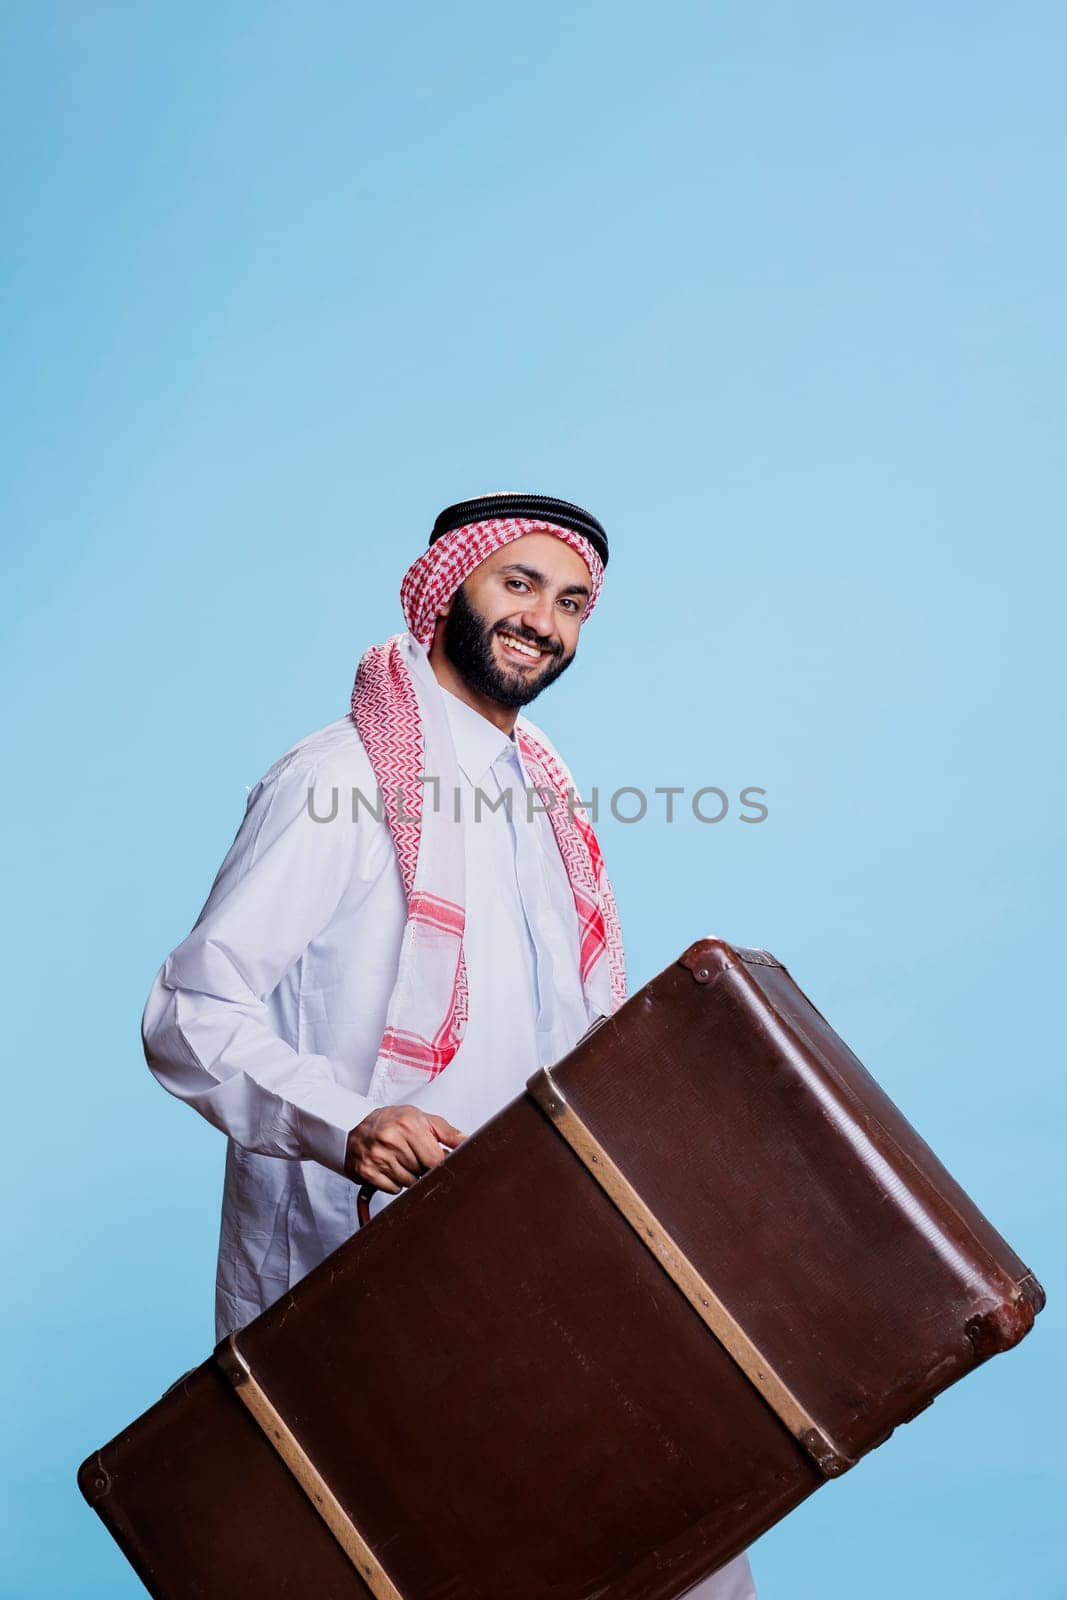 Smiling man wearing cultural muslim clothes carrying vintage suitcase while traveling studio portrait. Cheerful arab holding luggage while going on trip and looking at camera